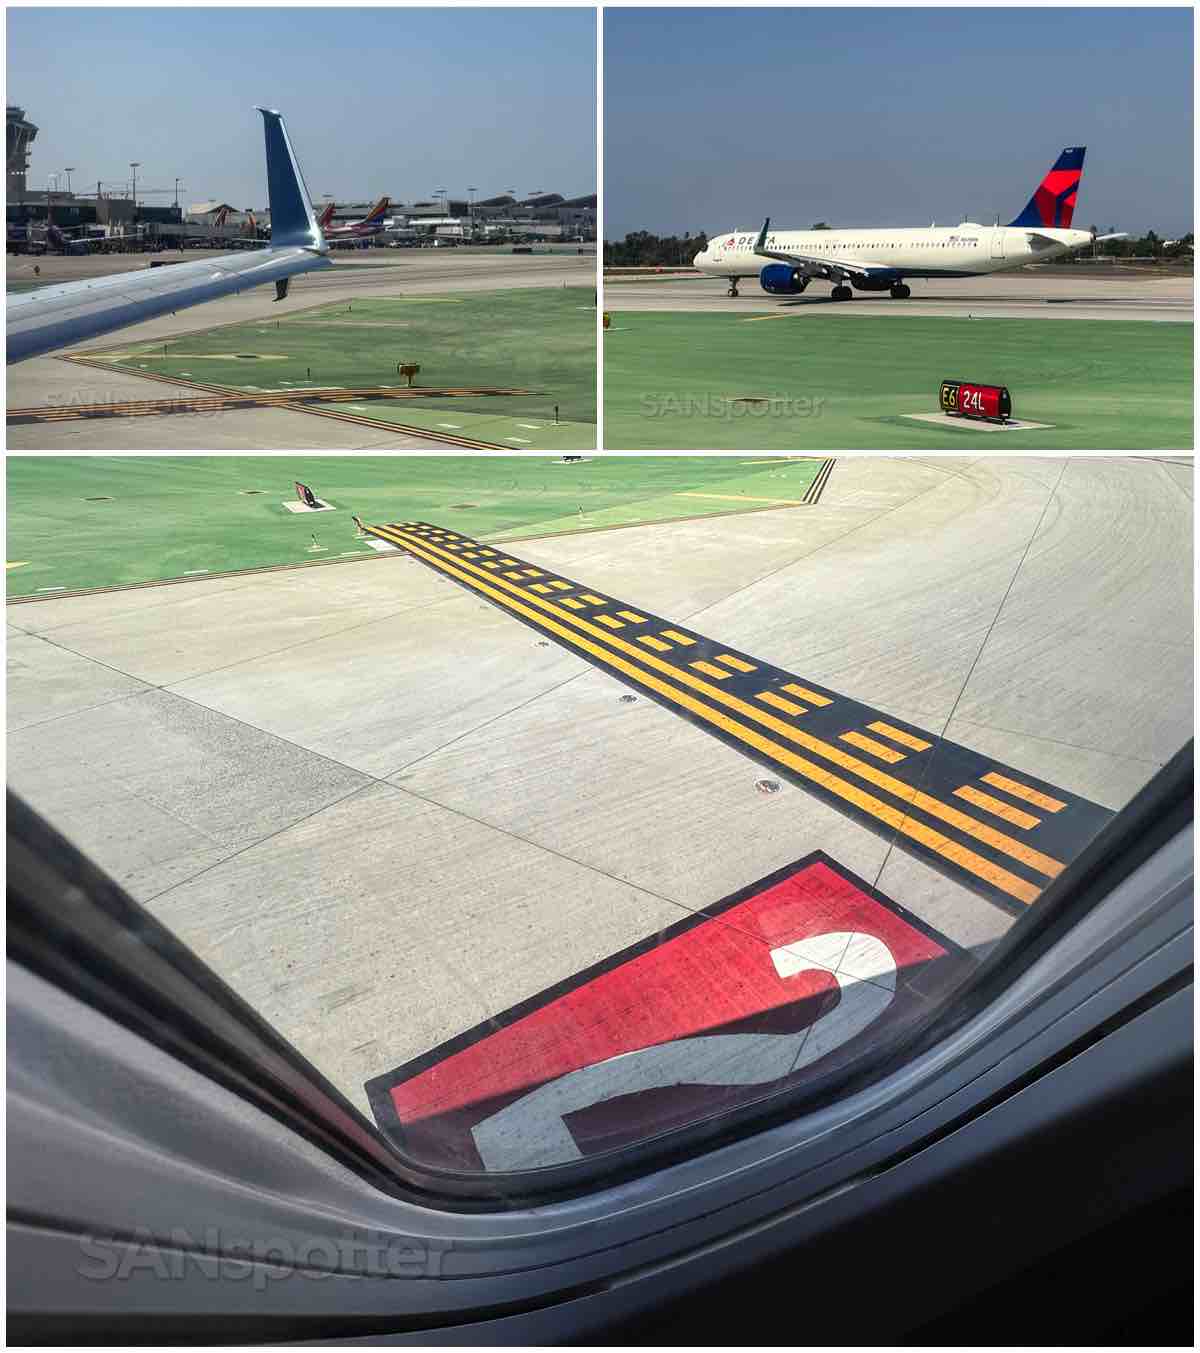 Delta 737-900 lining up for runway 24L LAX